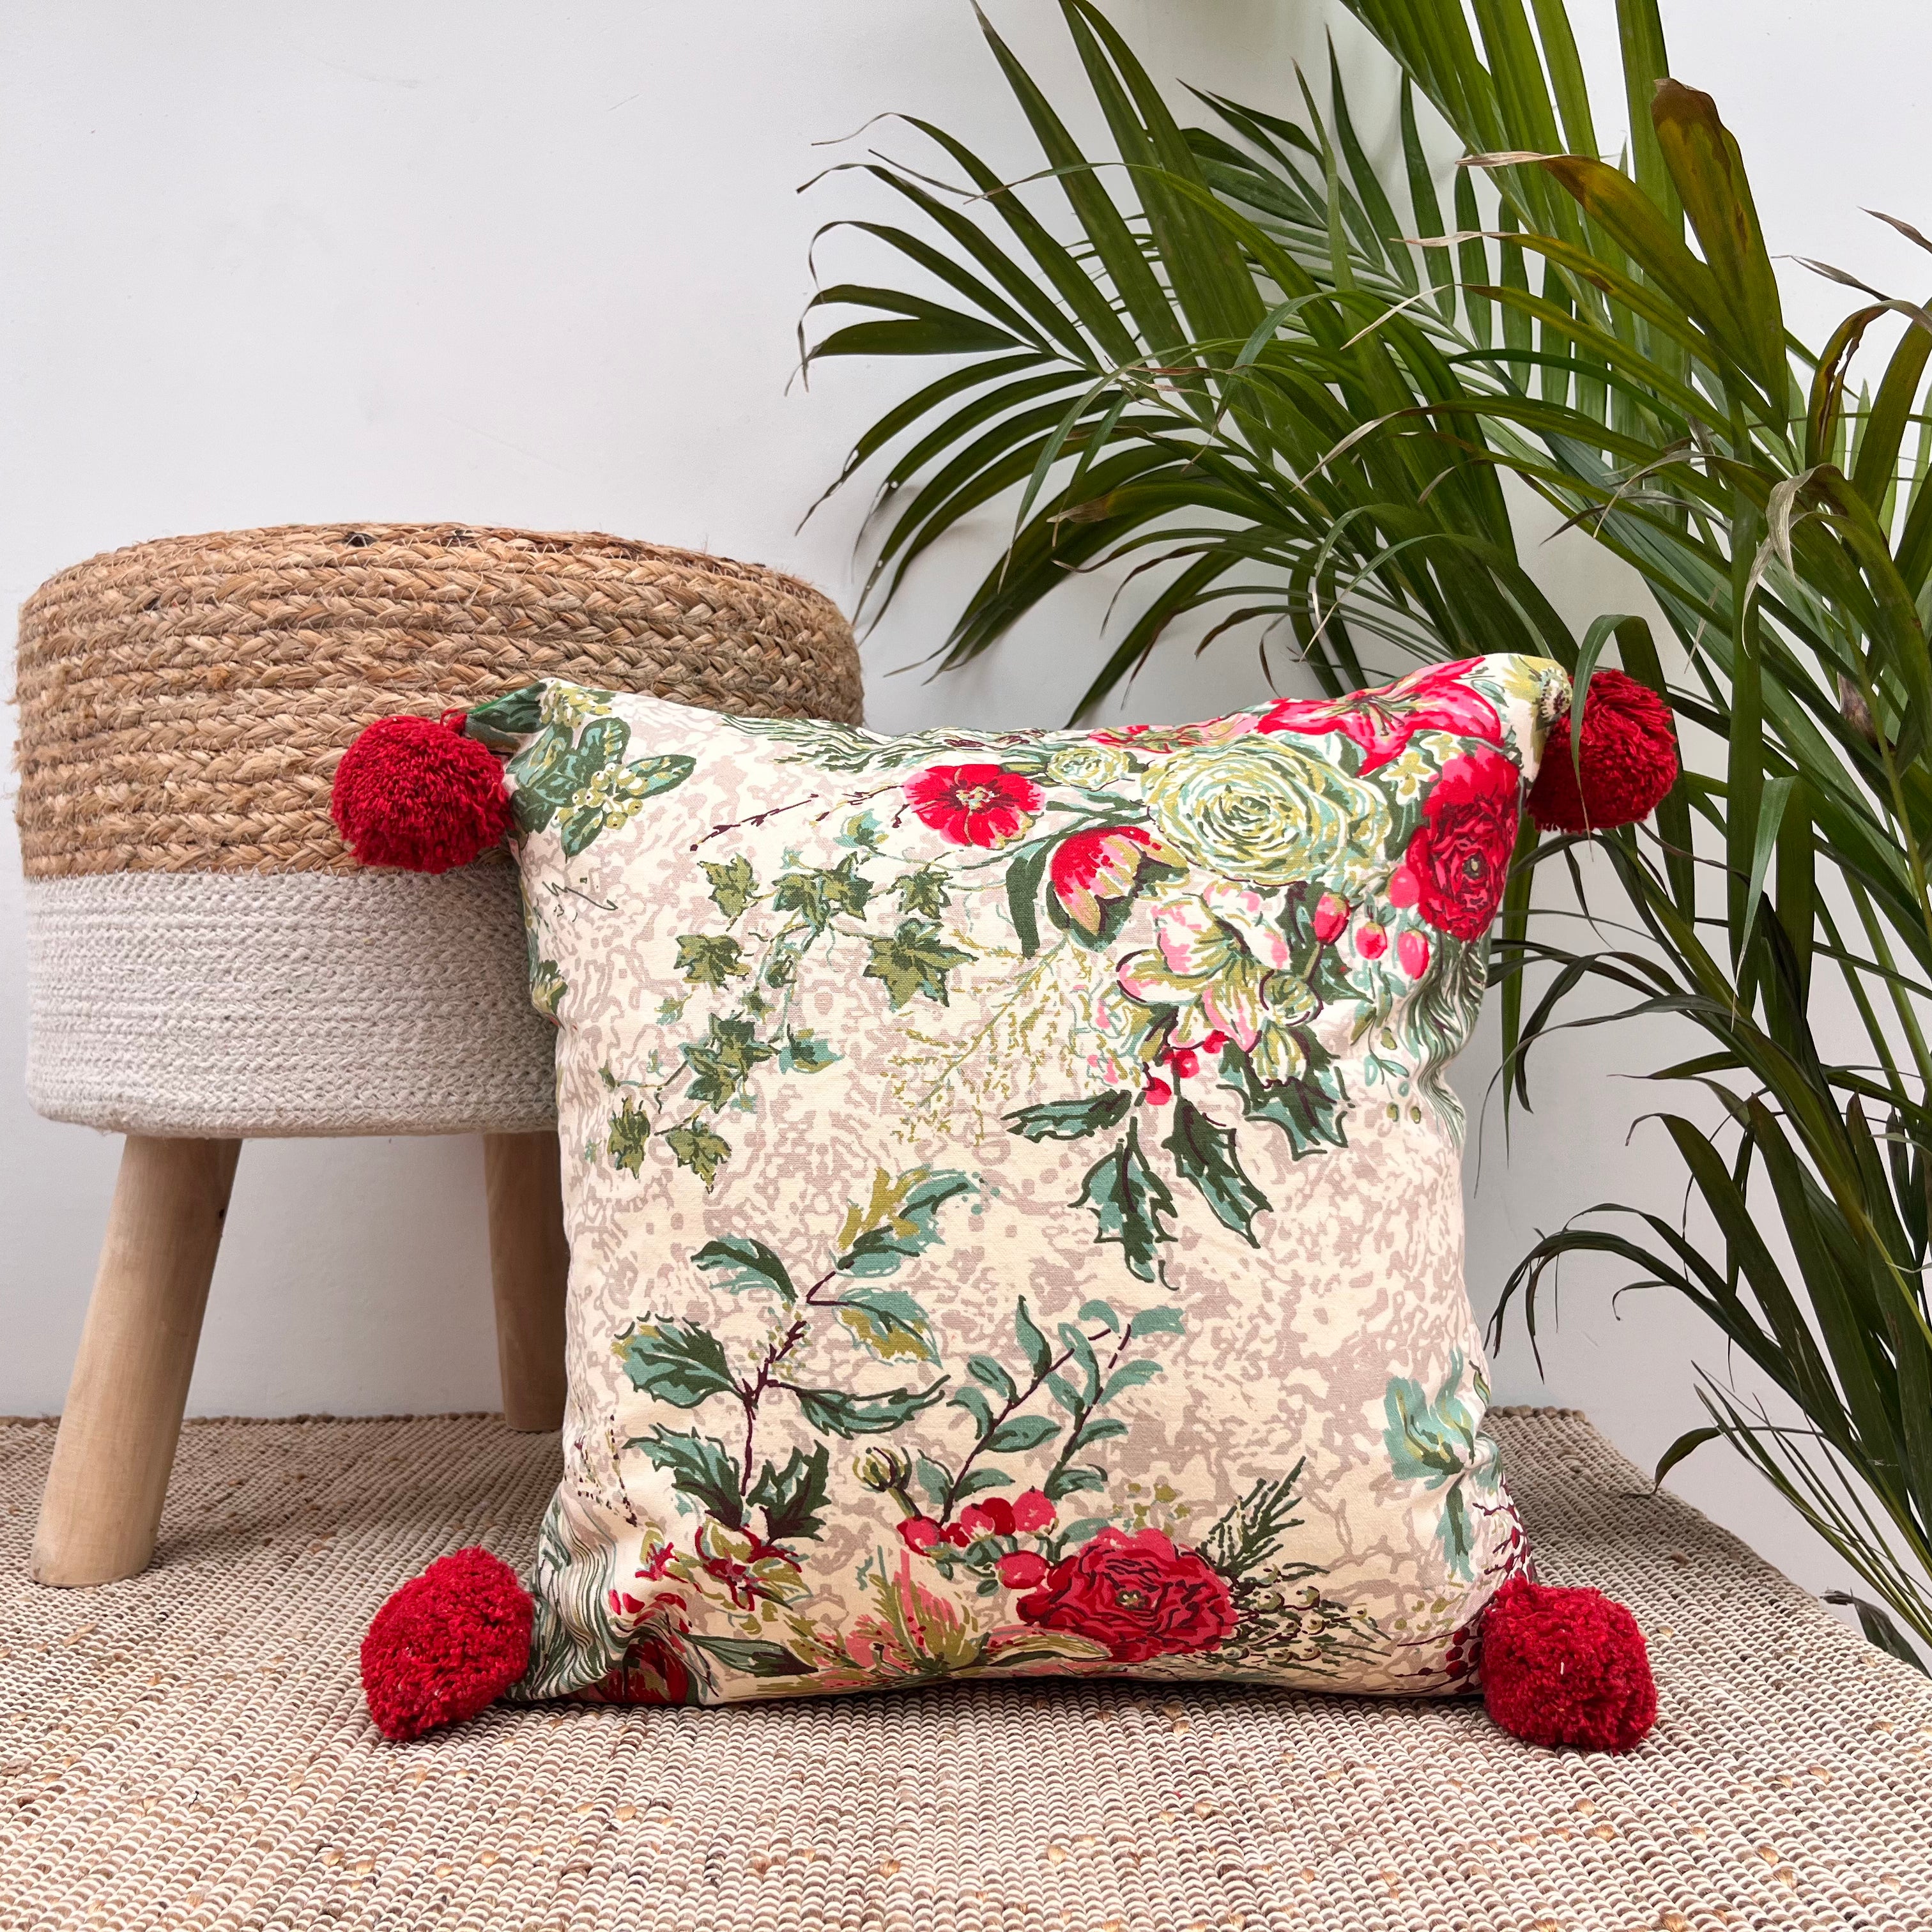 Printed Cushion Covers With Tassels 16x16